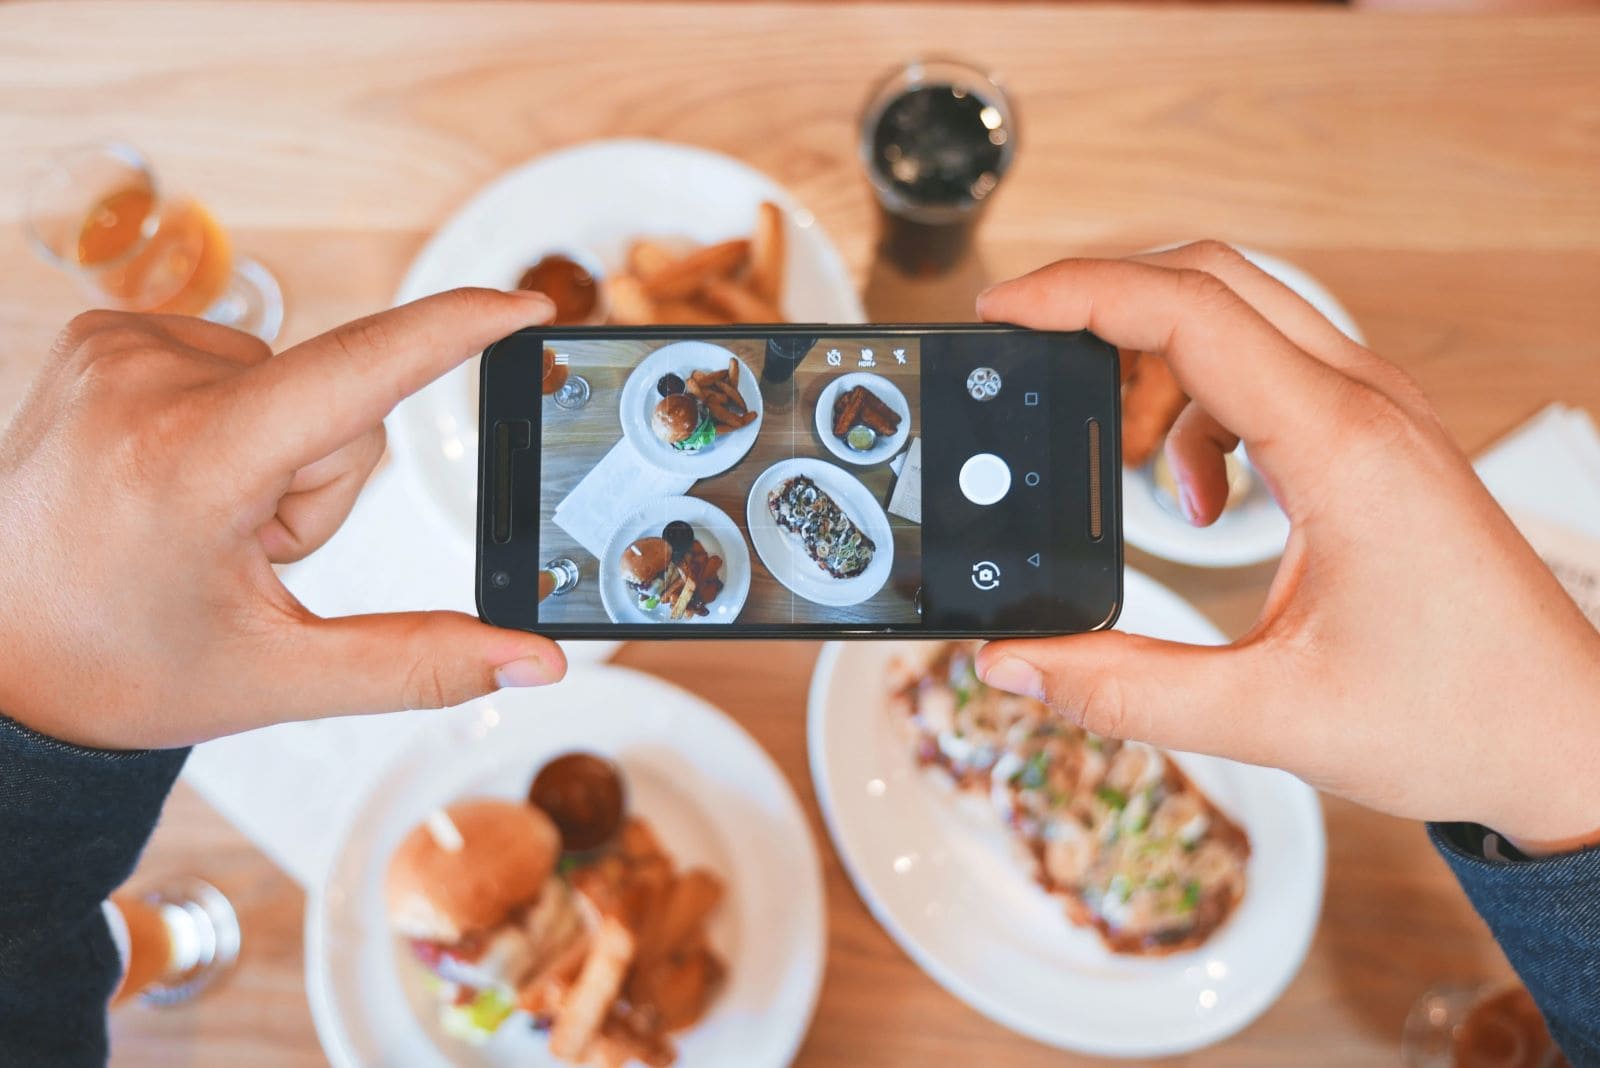 user-generated content example of a person photographing their food